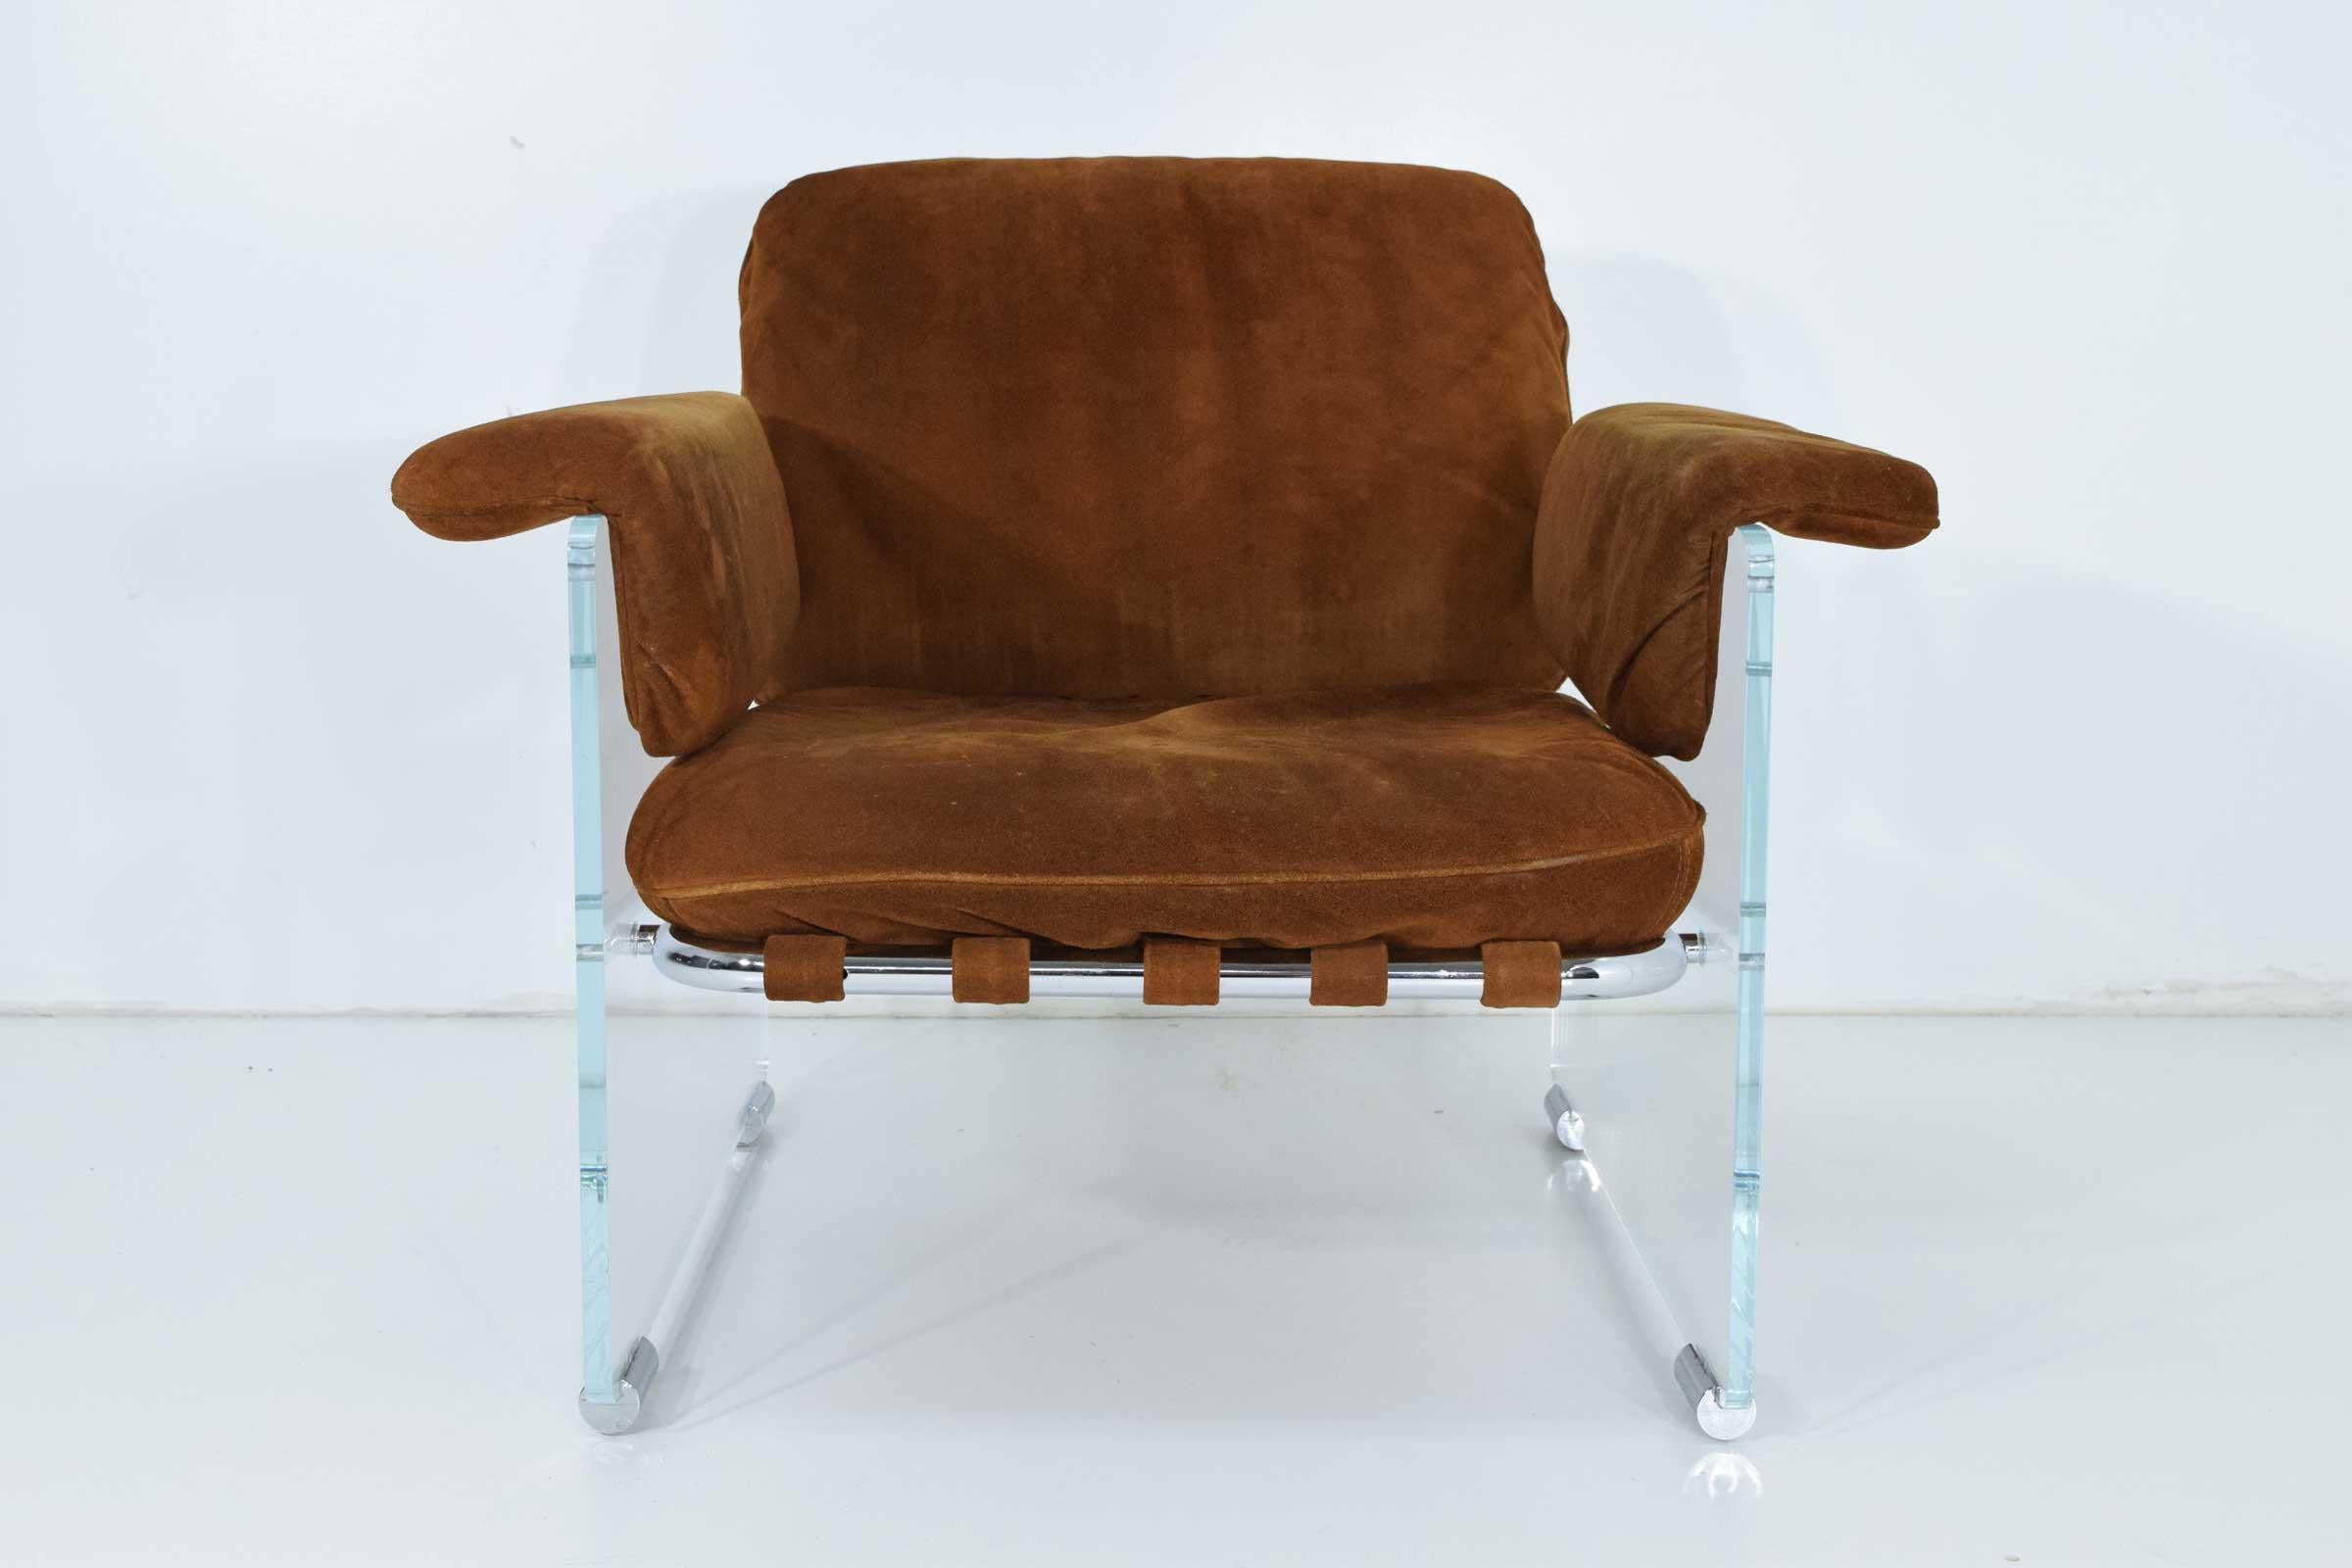 This amazing 1970s Pace Collection lounge chair feature thick Lucite panels with chrome details. Straps wrap the tubular chrome frame to support the cushions. This chair is upholstered in a suede which can be cleaned up or reupholstered in your